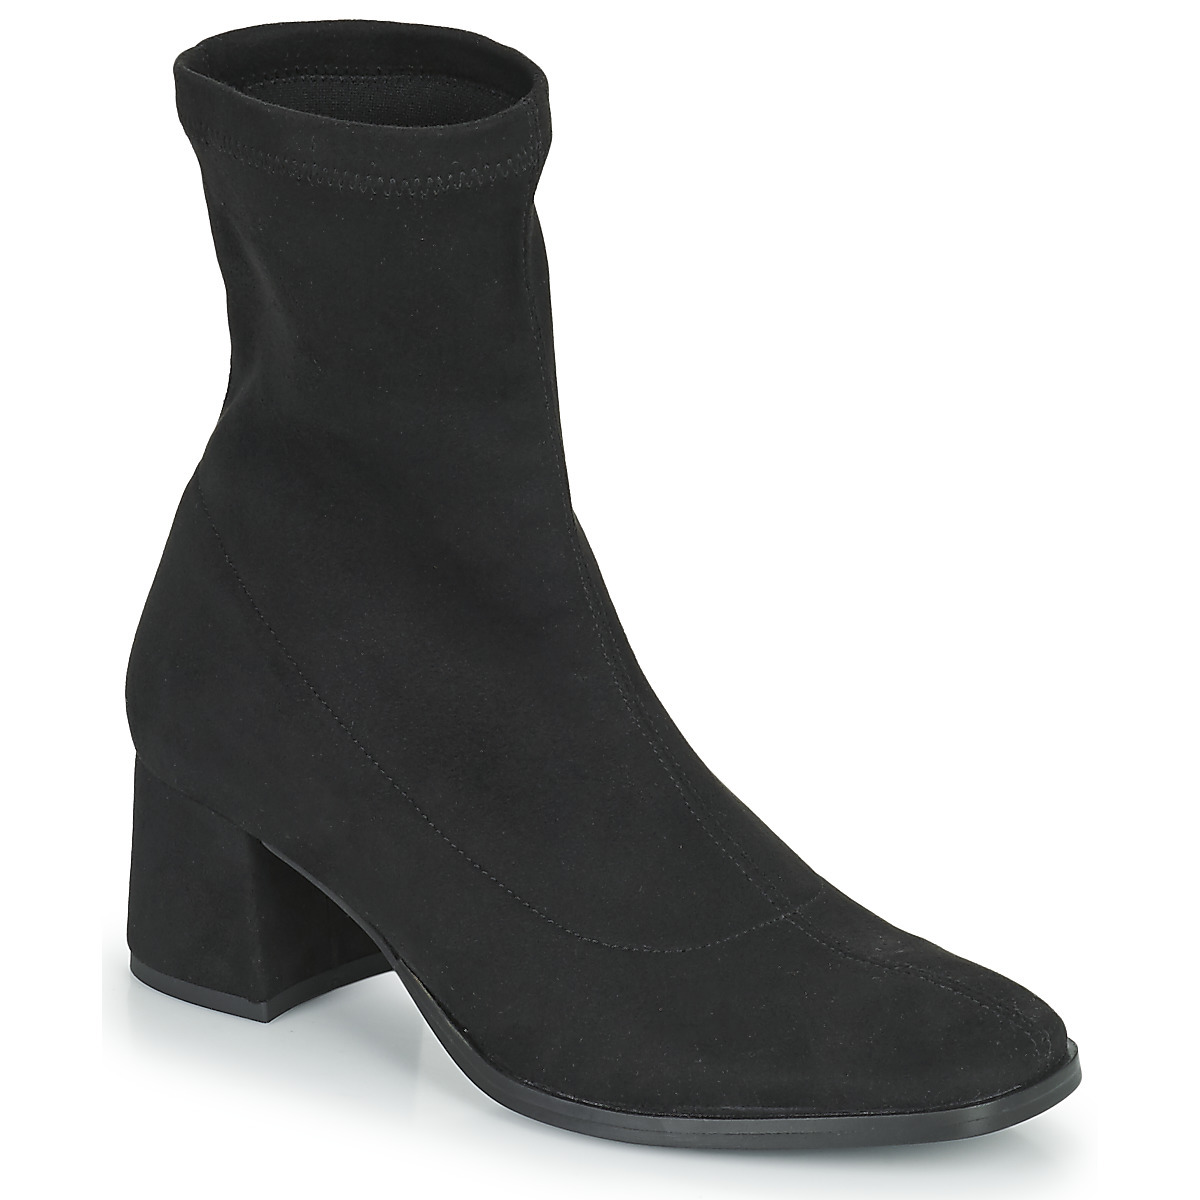 Myma Womens Black Ankle Boots by Spartoo GOOFASH